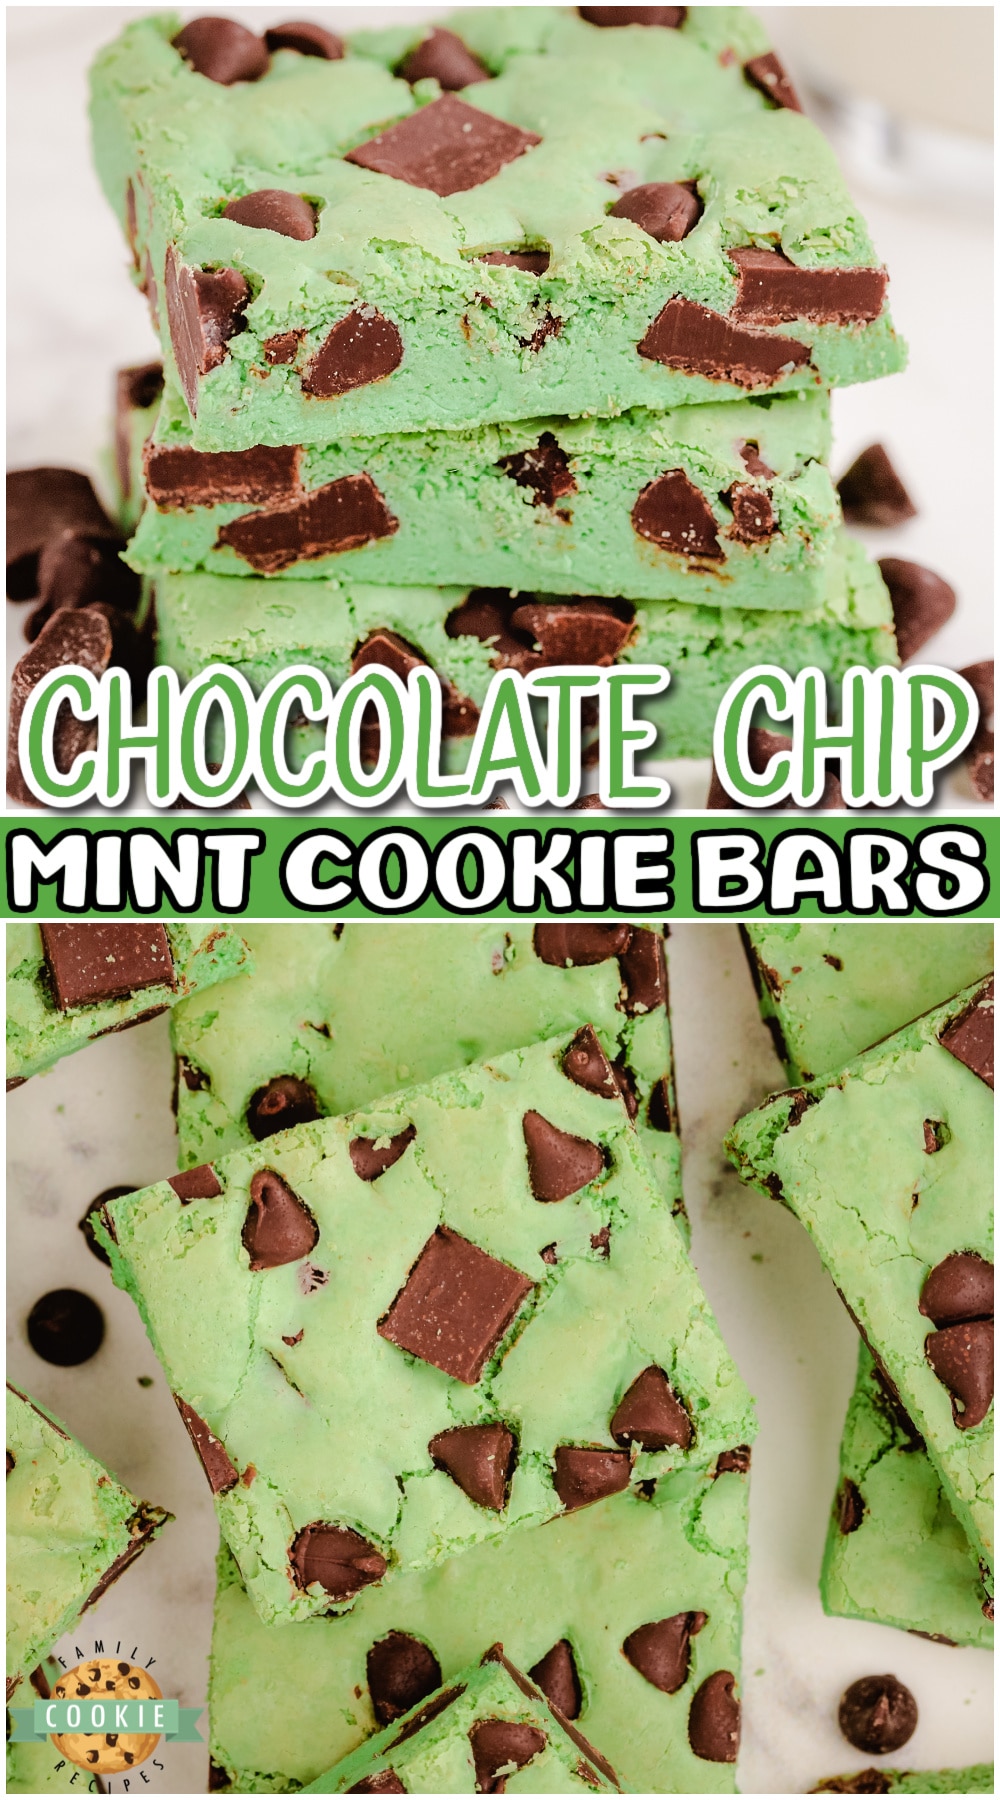 Mint chocolate chip cookie bars are the perfect mint green St. Patrick's Day dessert! Made from scratch with simple ingredients and steps these chewy cookie bars are always a fun treat. via @buttergirls